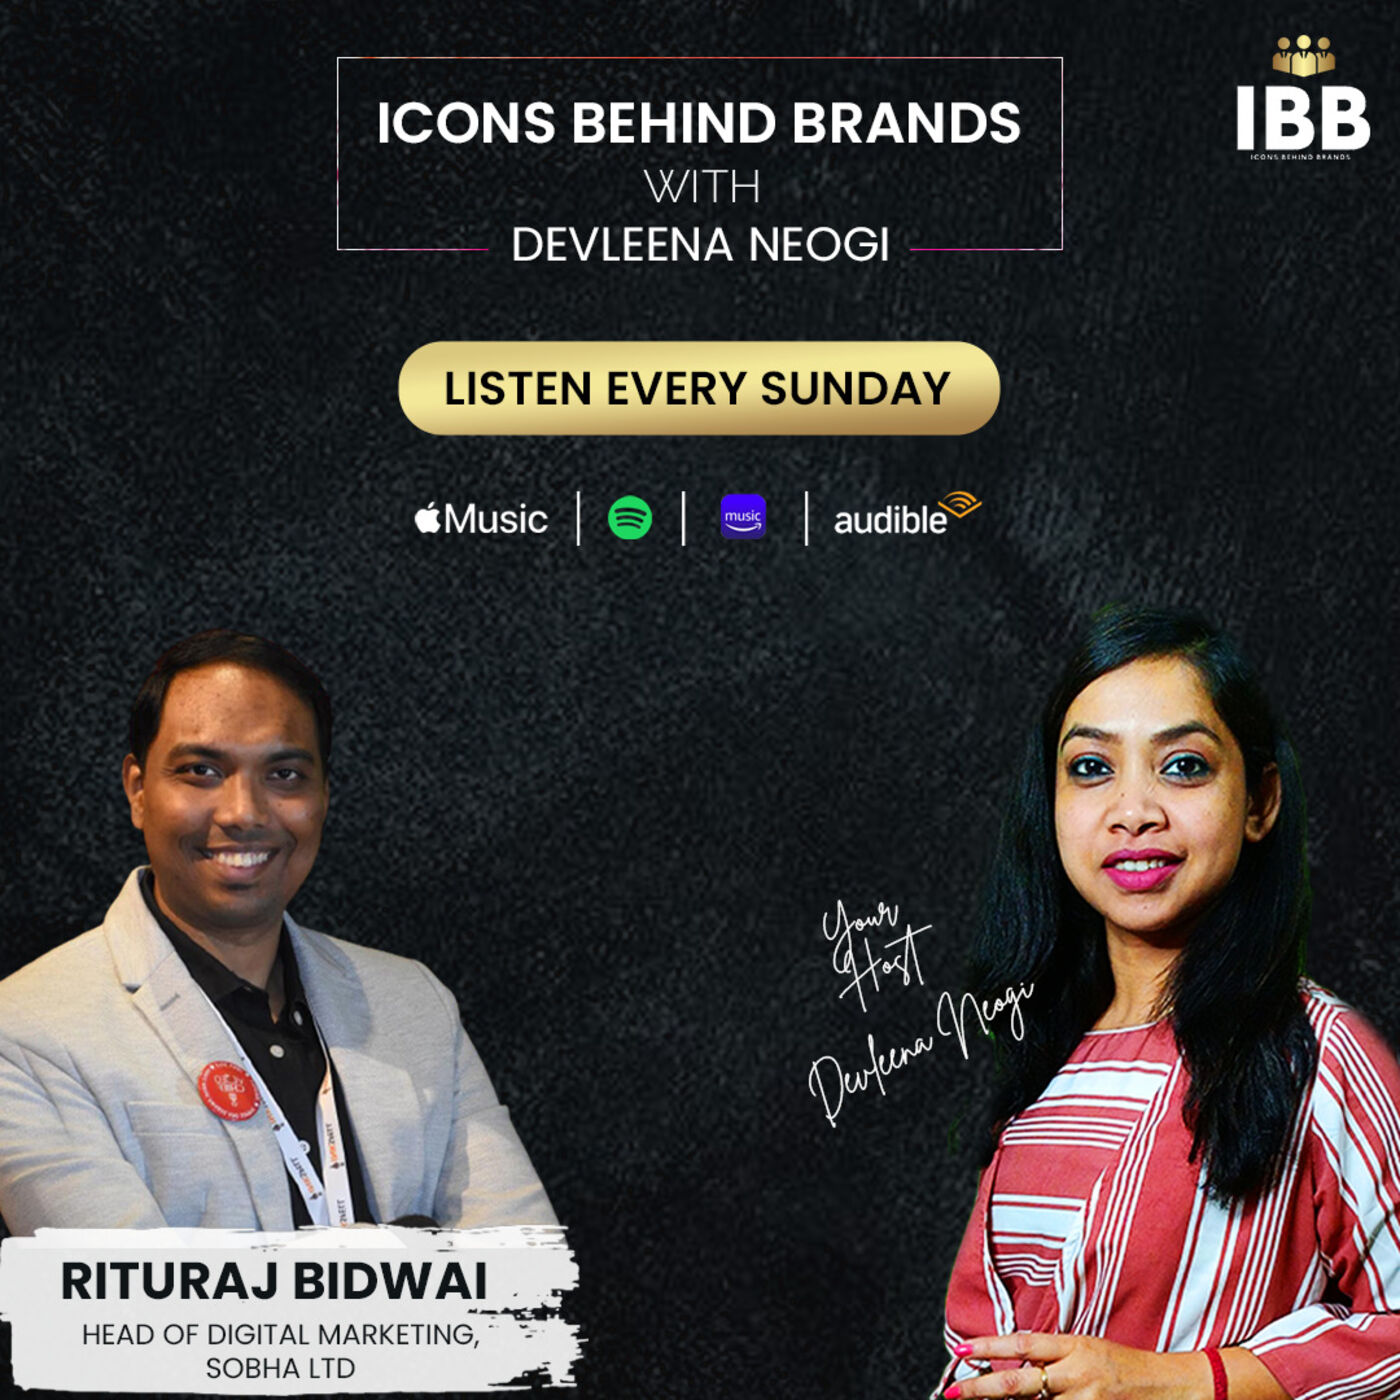 Digital Marketing & Strategy with Mr Rituraj Bidwai | Next on the marketing podcast of Icons Behind Brands